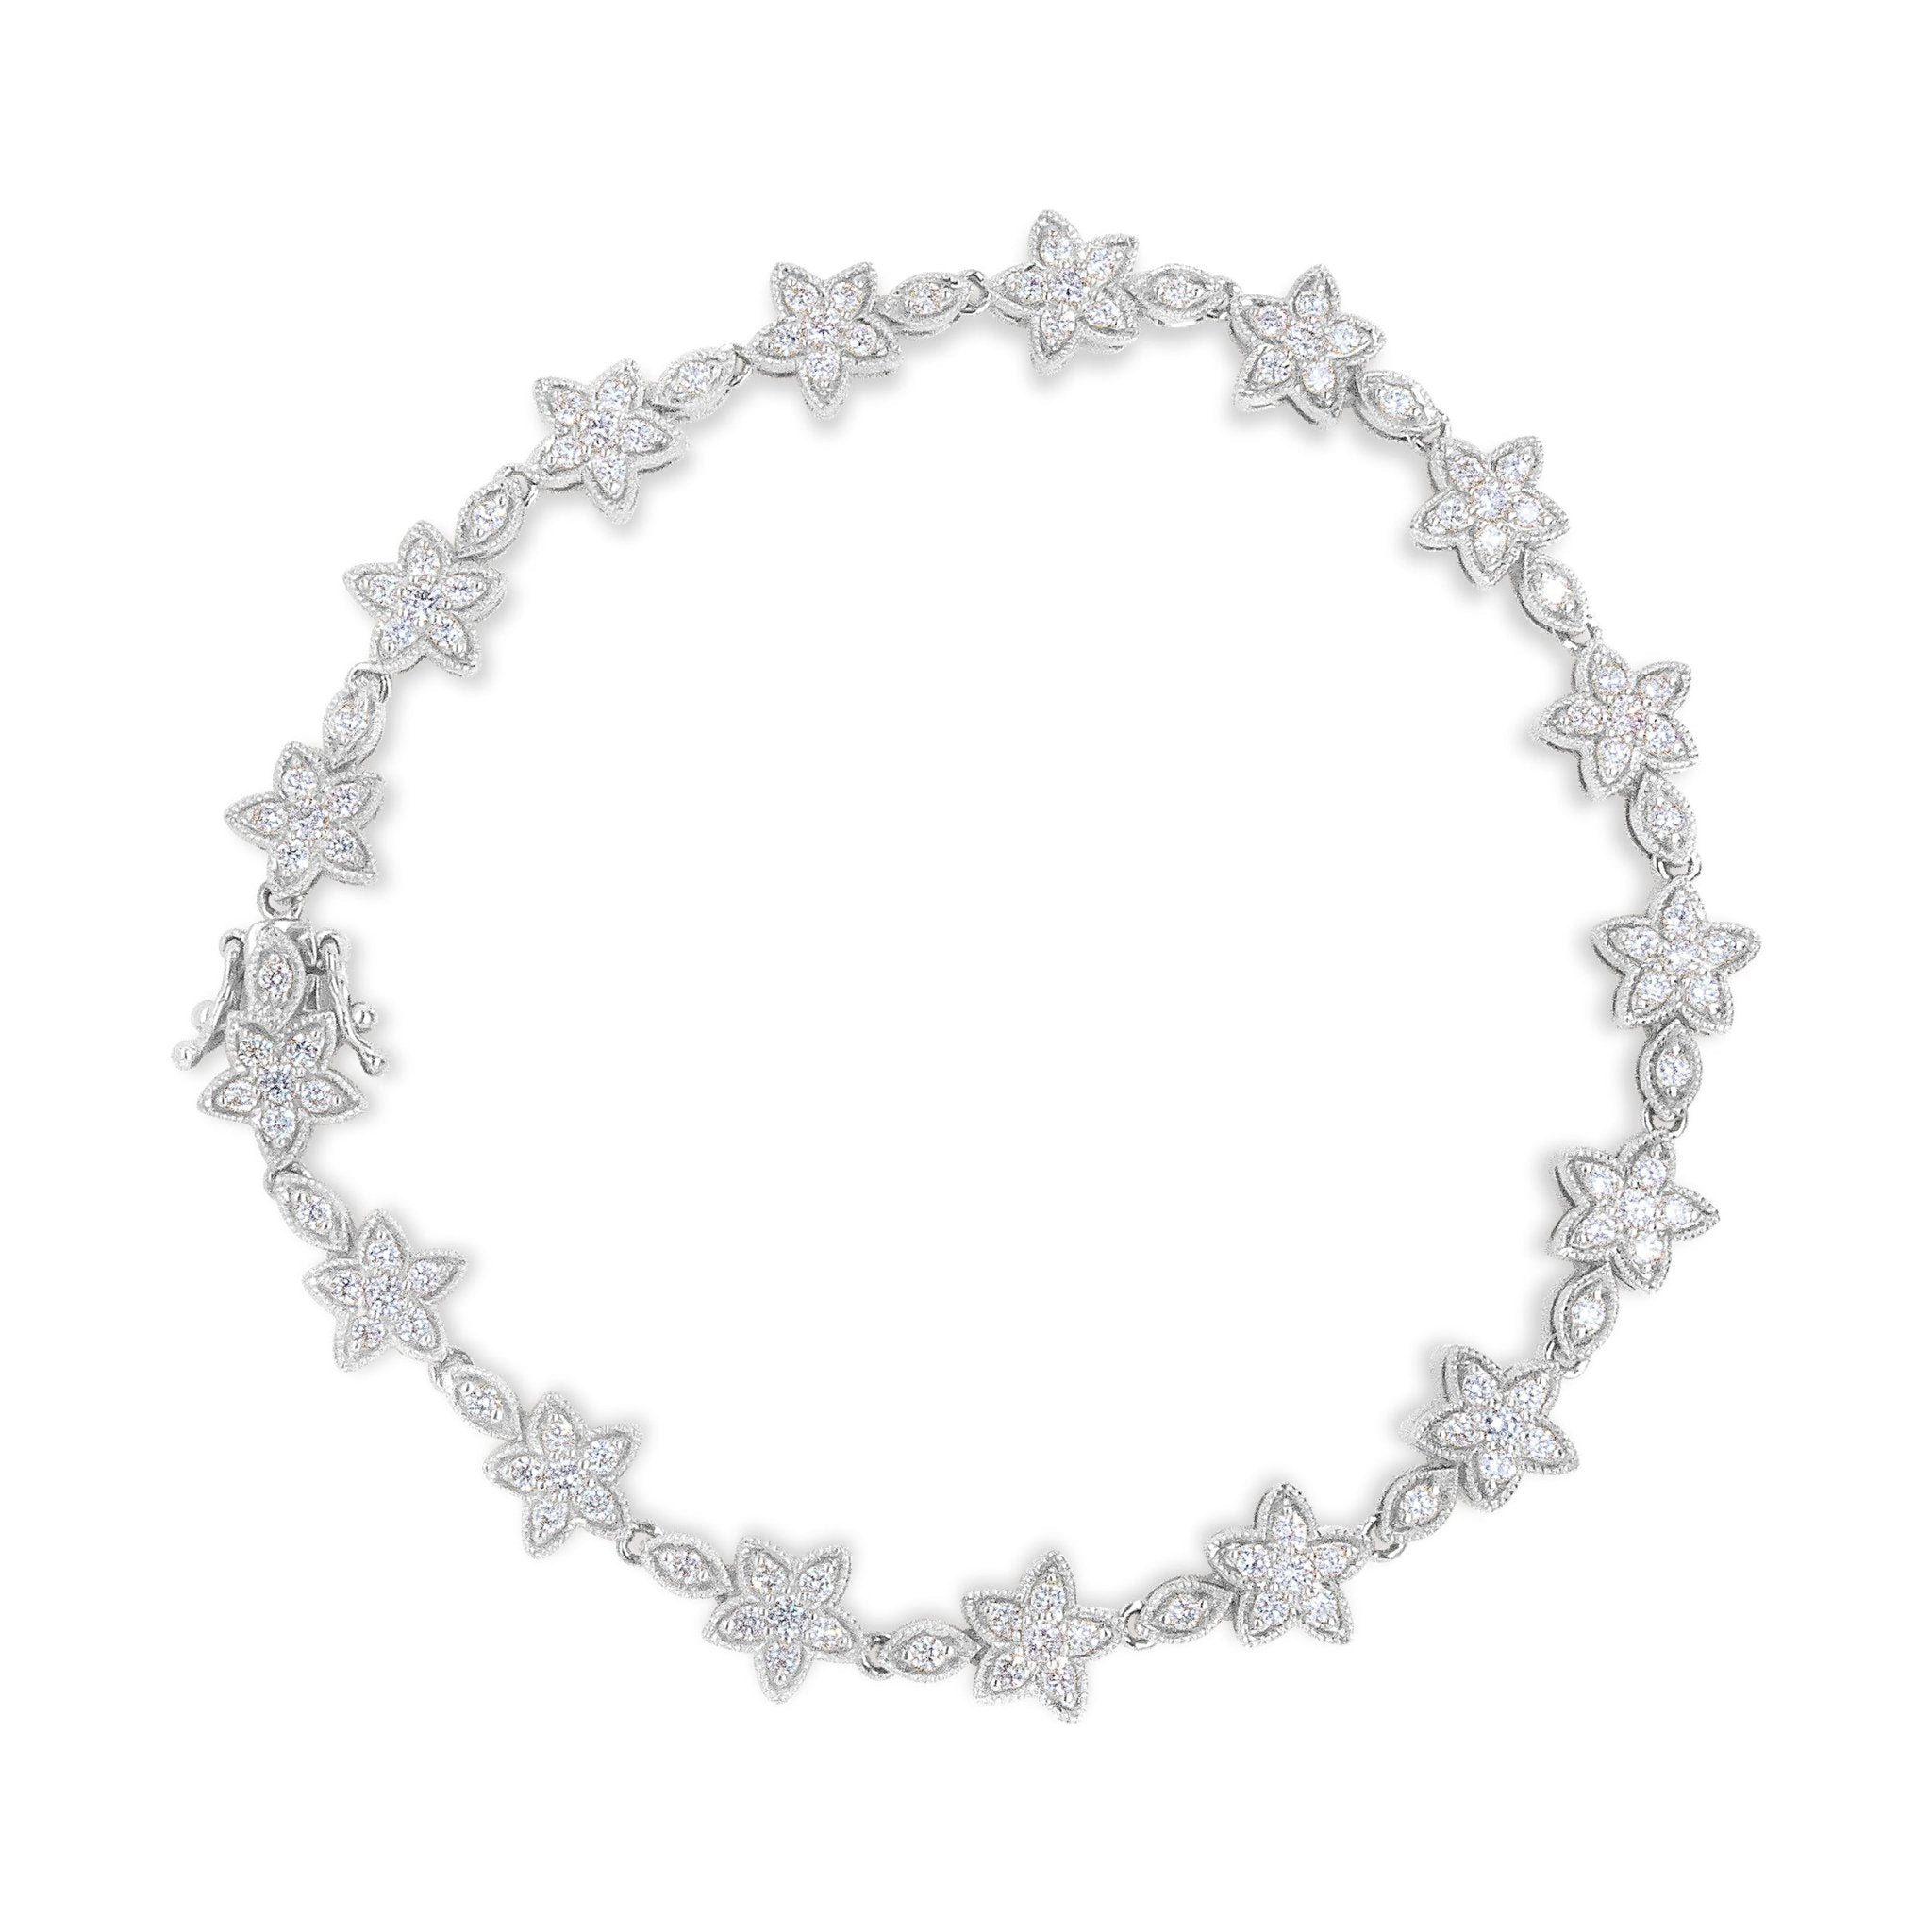 14K White Gold 1 1/5 Cttw Round Diamond Flower Blossom Link Bracelet (H-I Color, Si1-Si2 Clarity) - Size 7